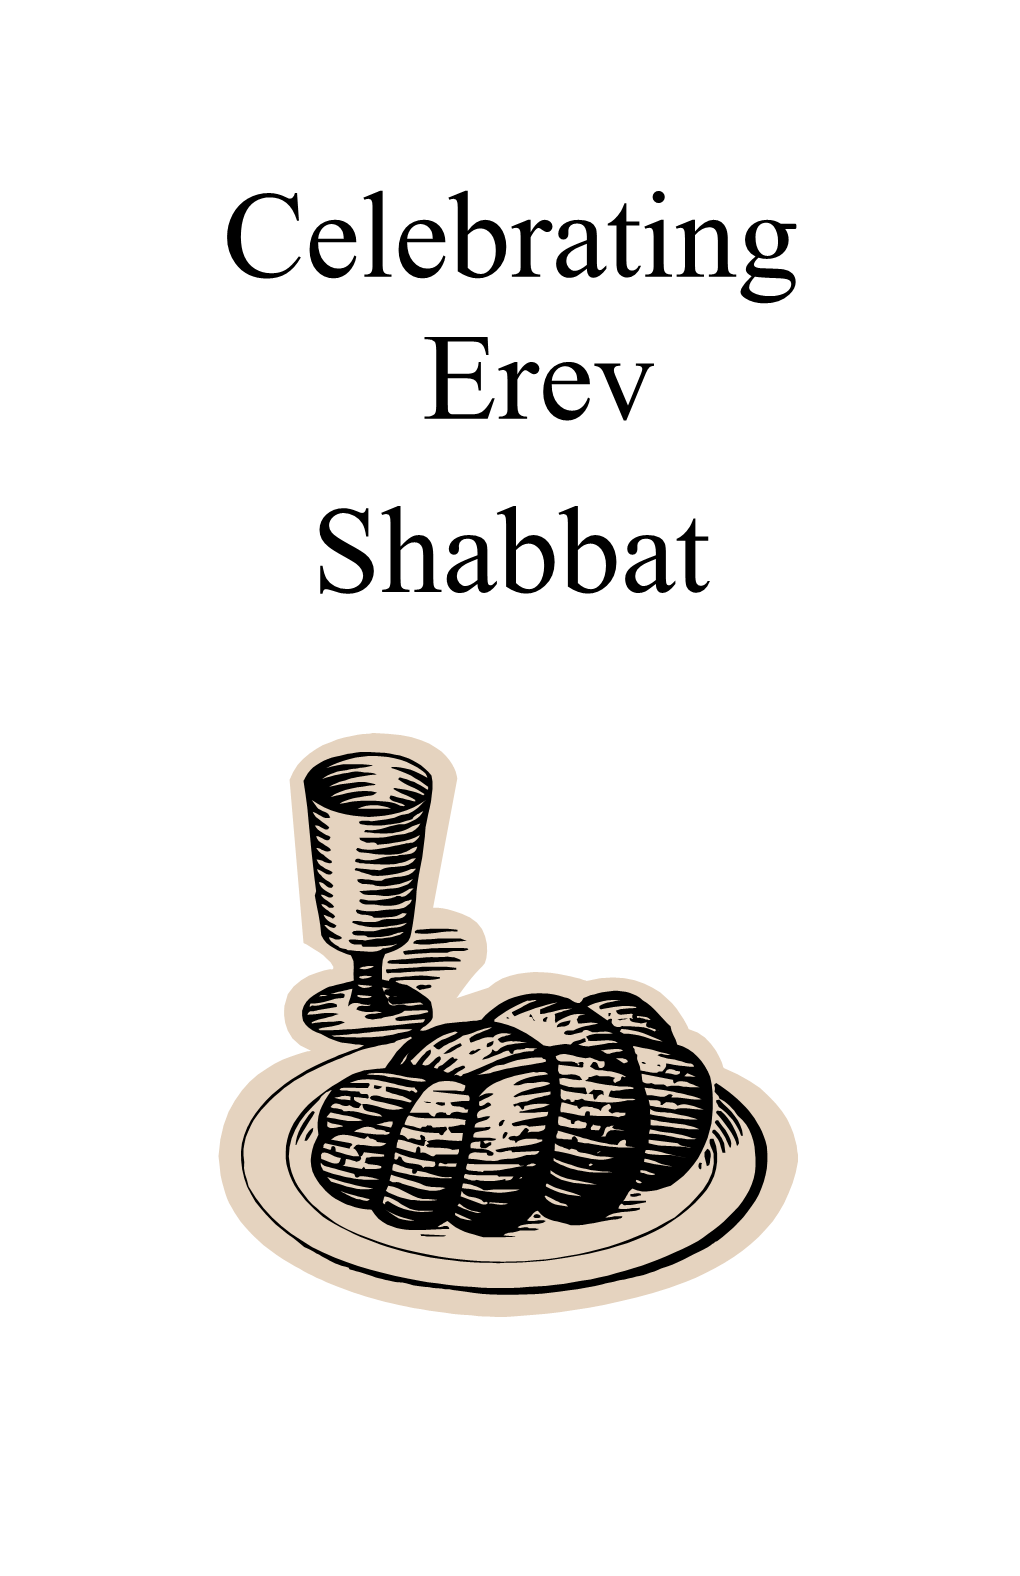 The Wife Begins the Blessings of Shabbat by Praying the Following